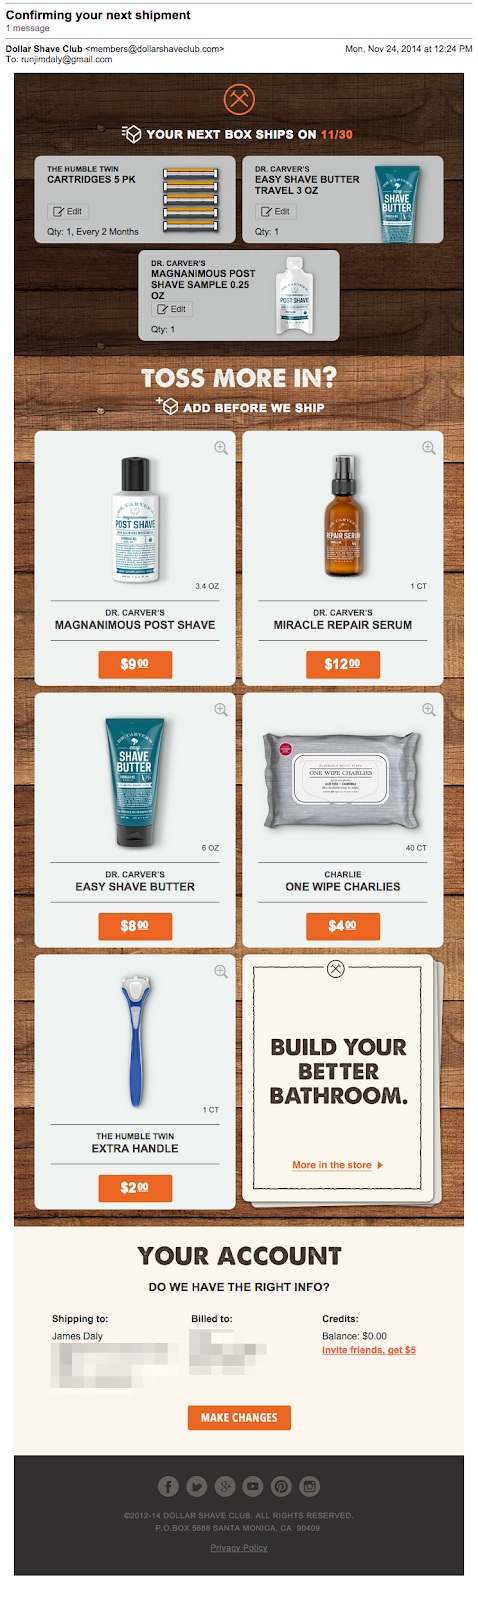 Dollar-Shave-Club-Upsell-order-confirmation-Email